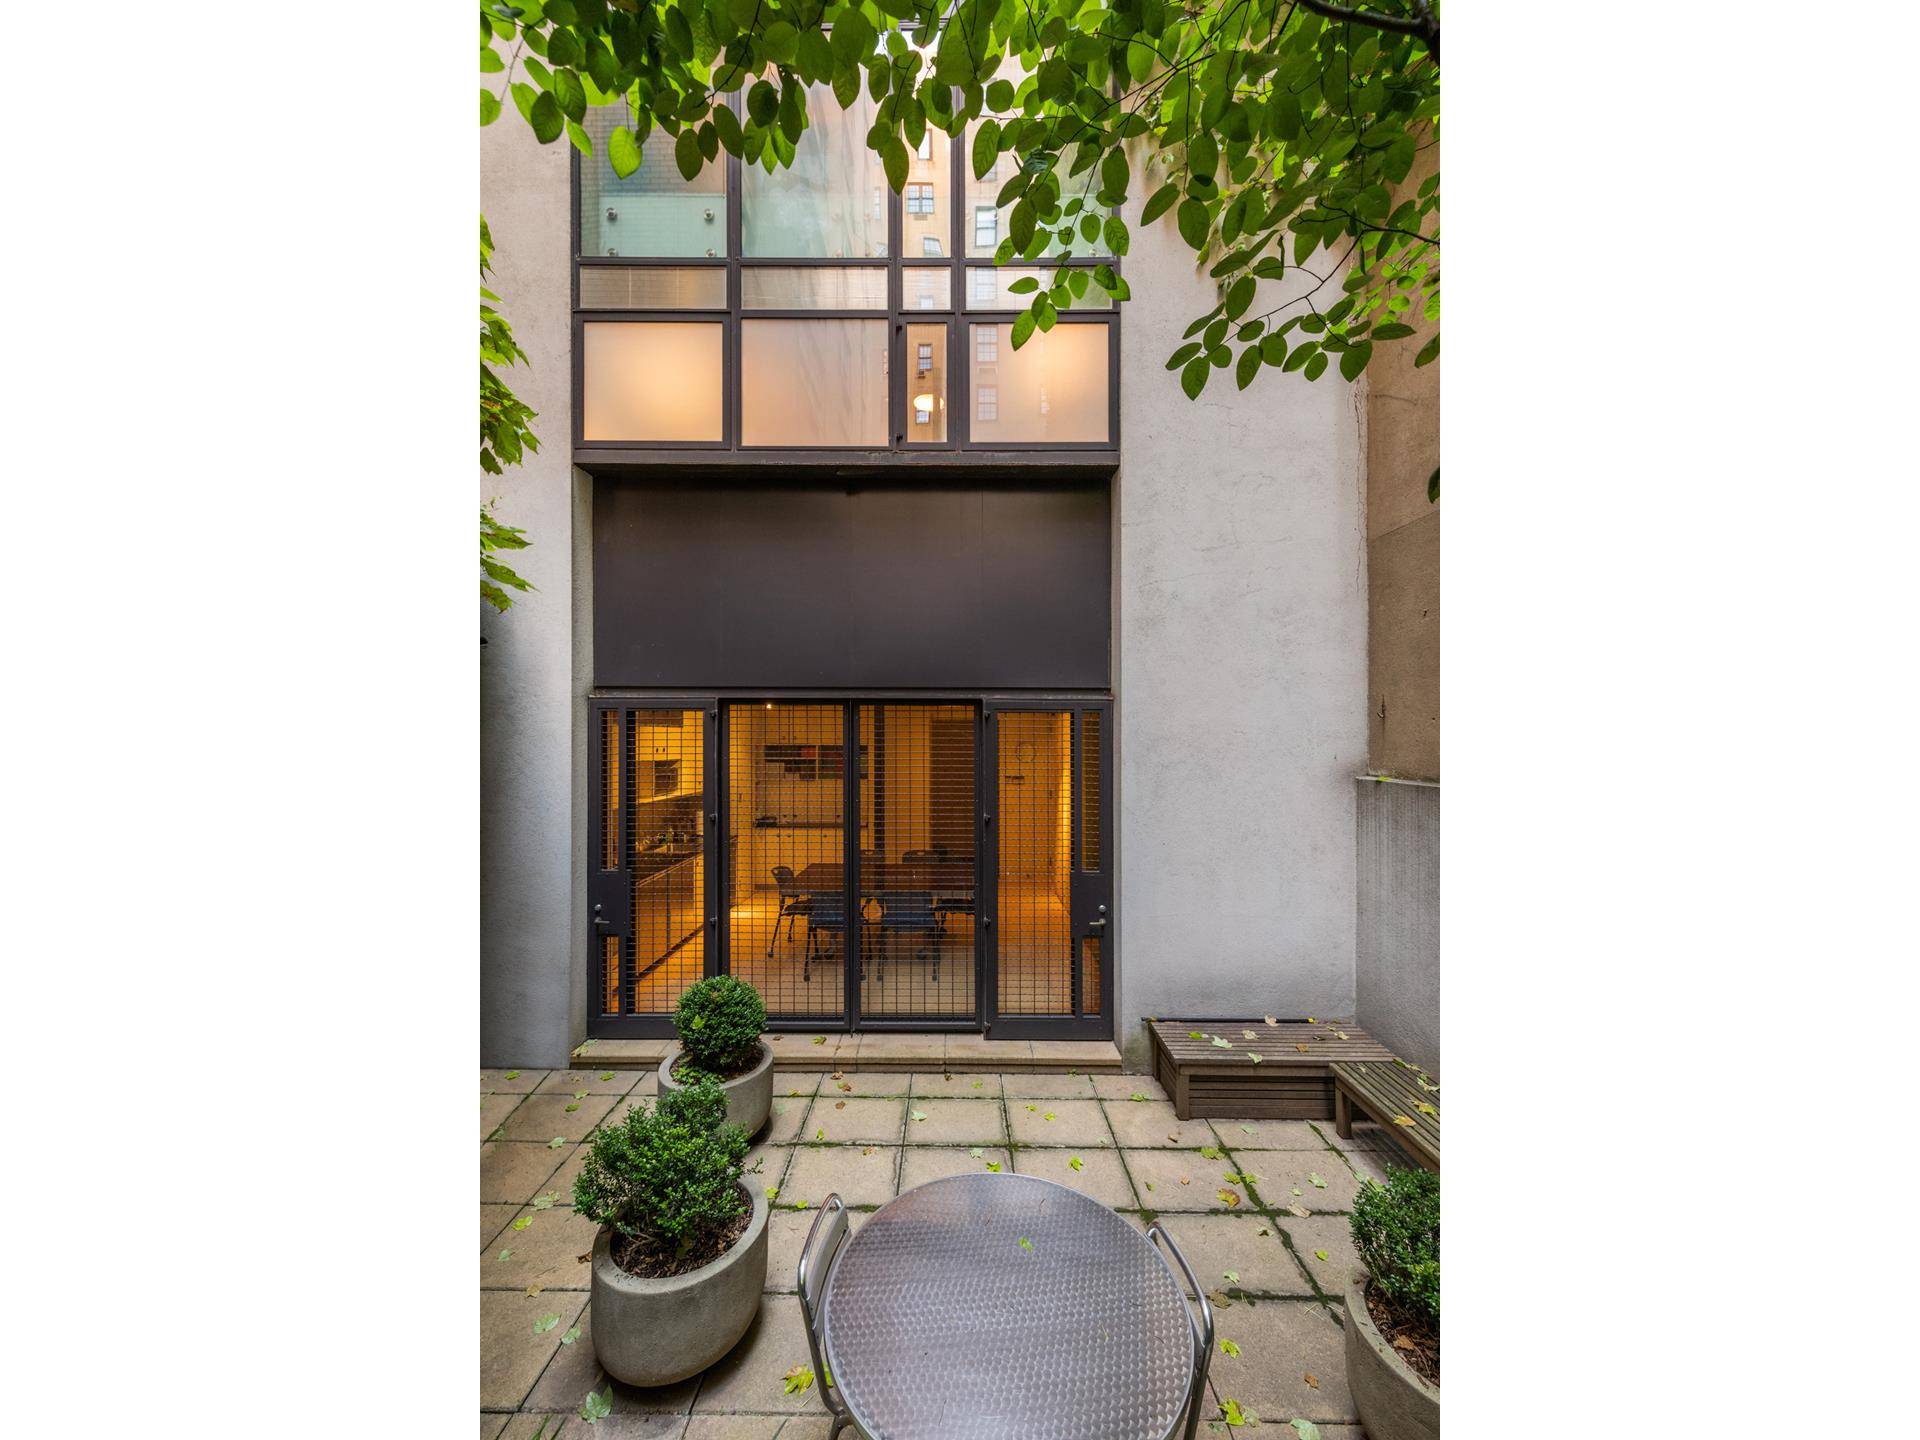 2 East 78th Street is a 26' wide single family house currently used as headquarters of a nonprofit organization.